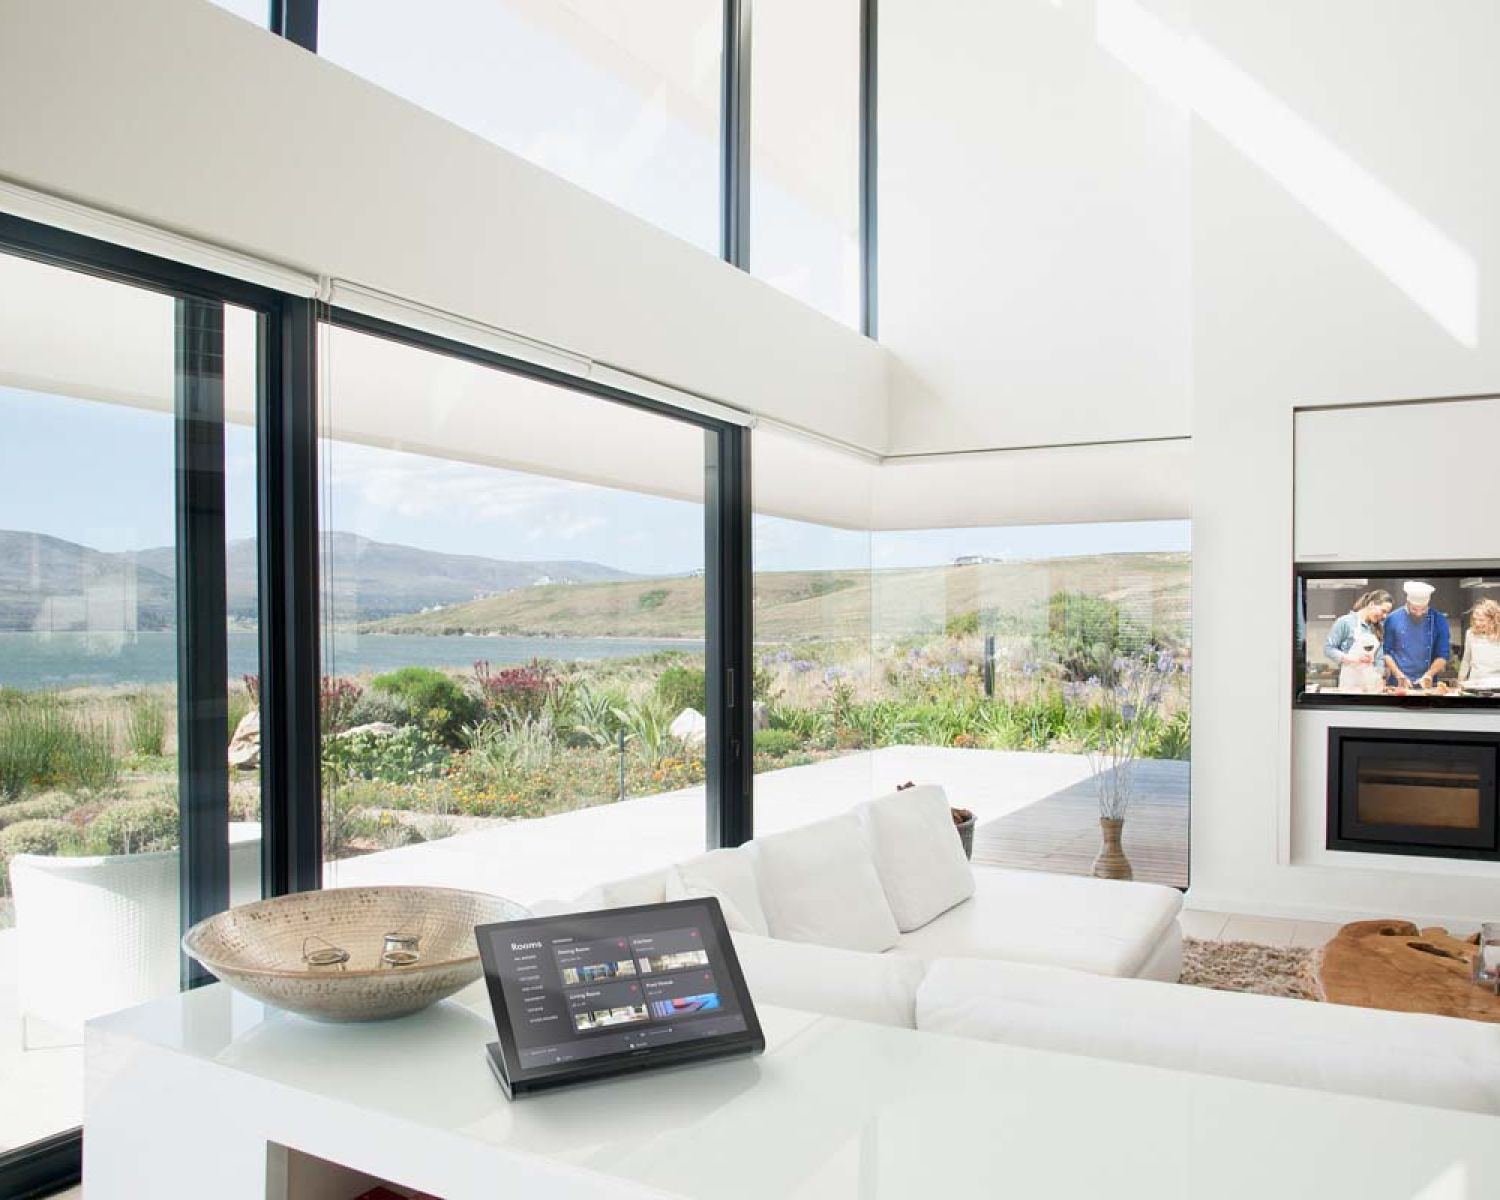 Crestron touch panel in modern home with glass walls